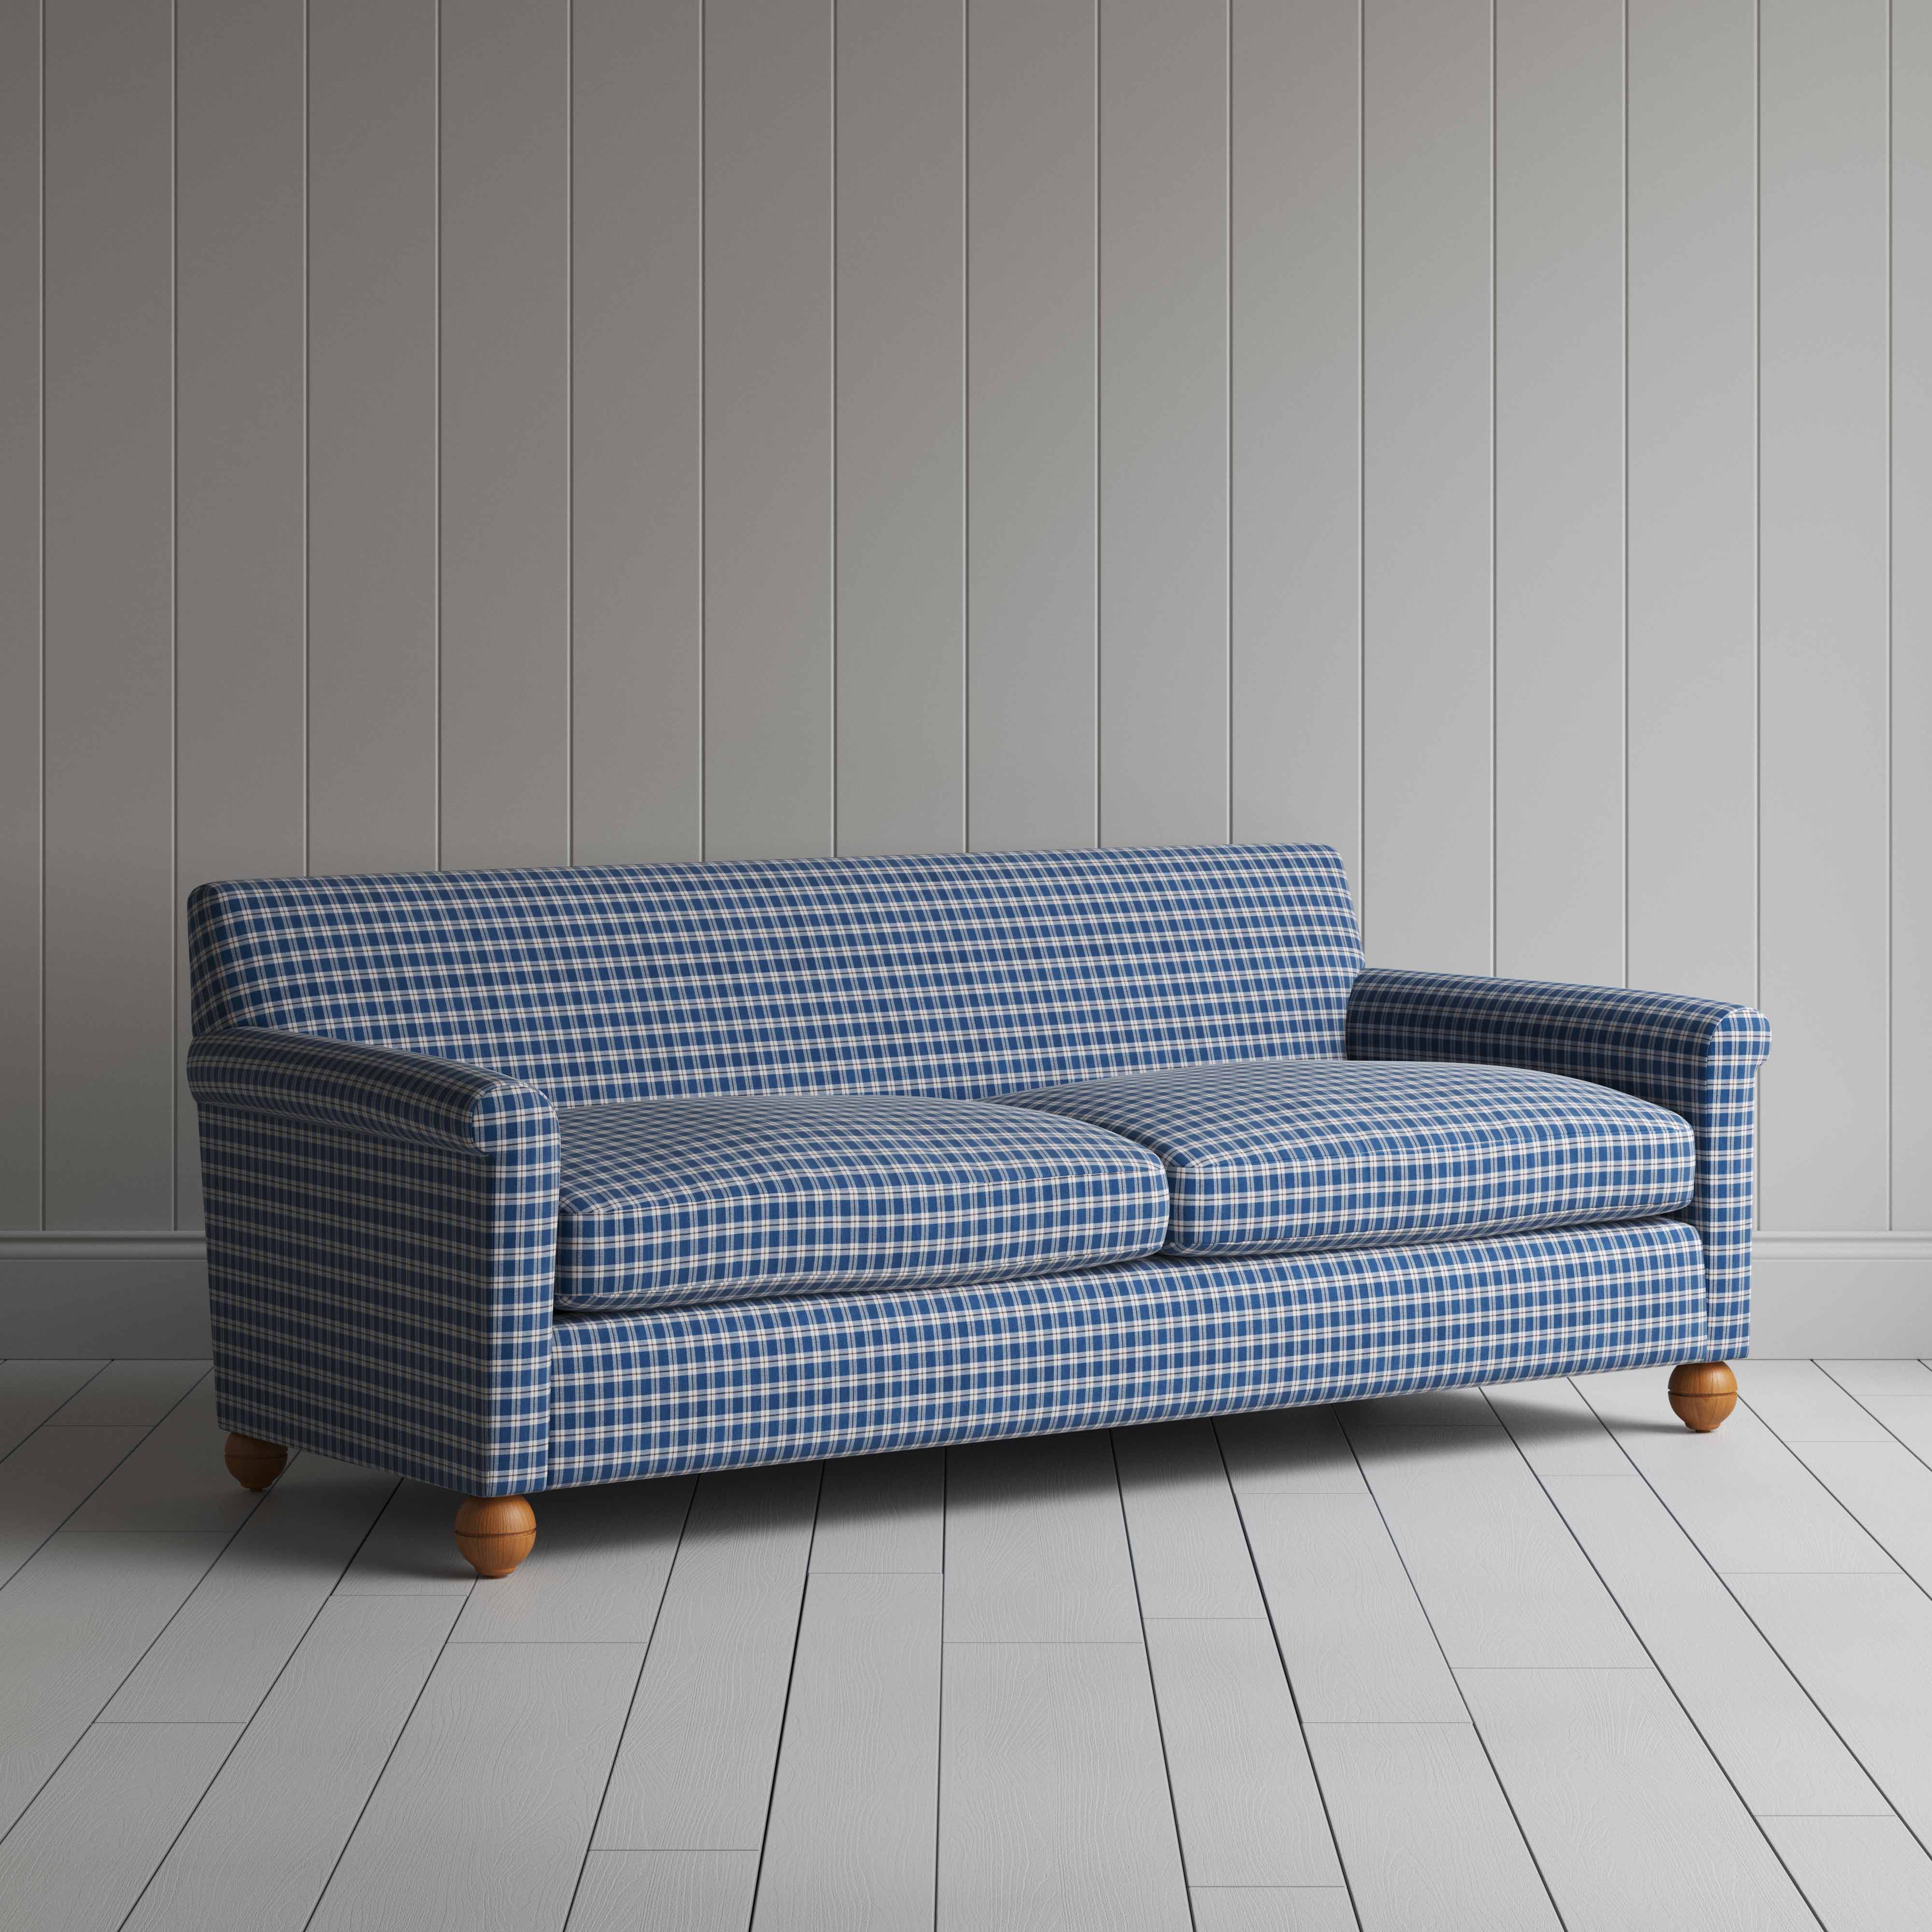  Idler 4 Seater Sofa in Well Plaid Cotton, Blue Brown 